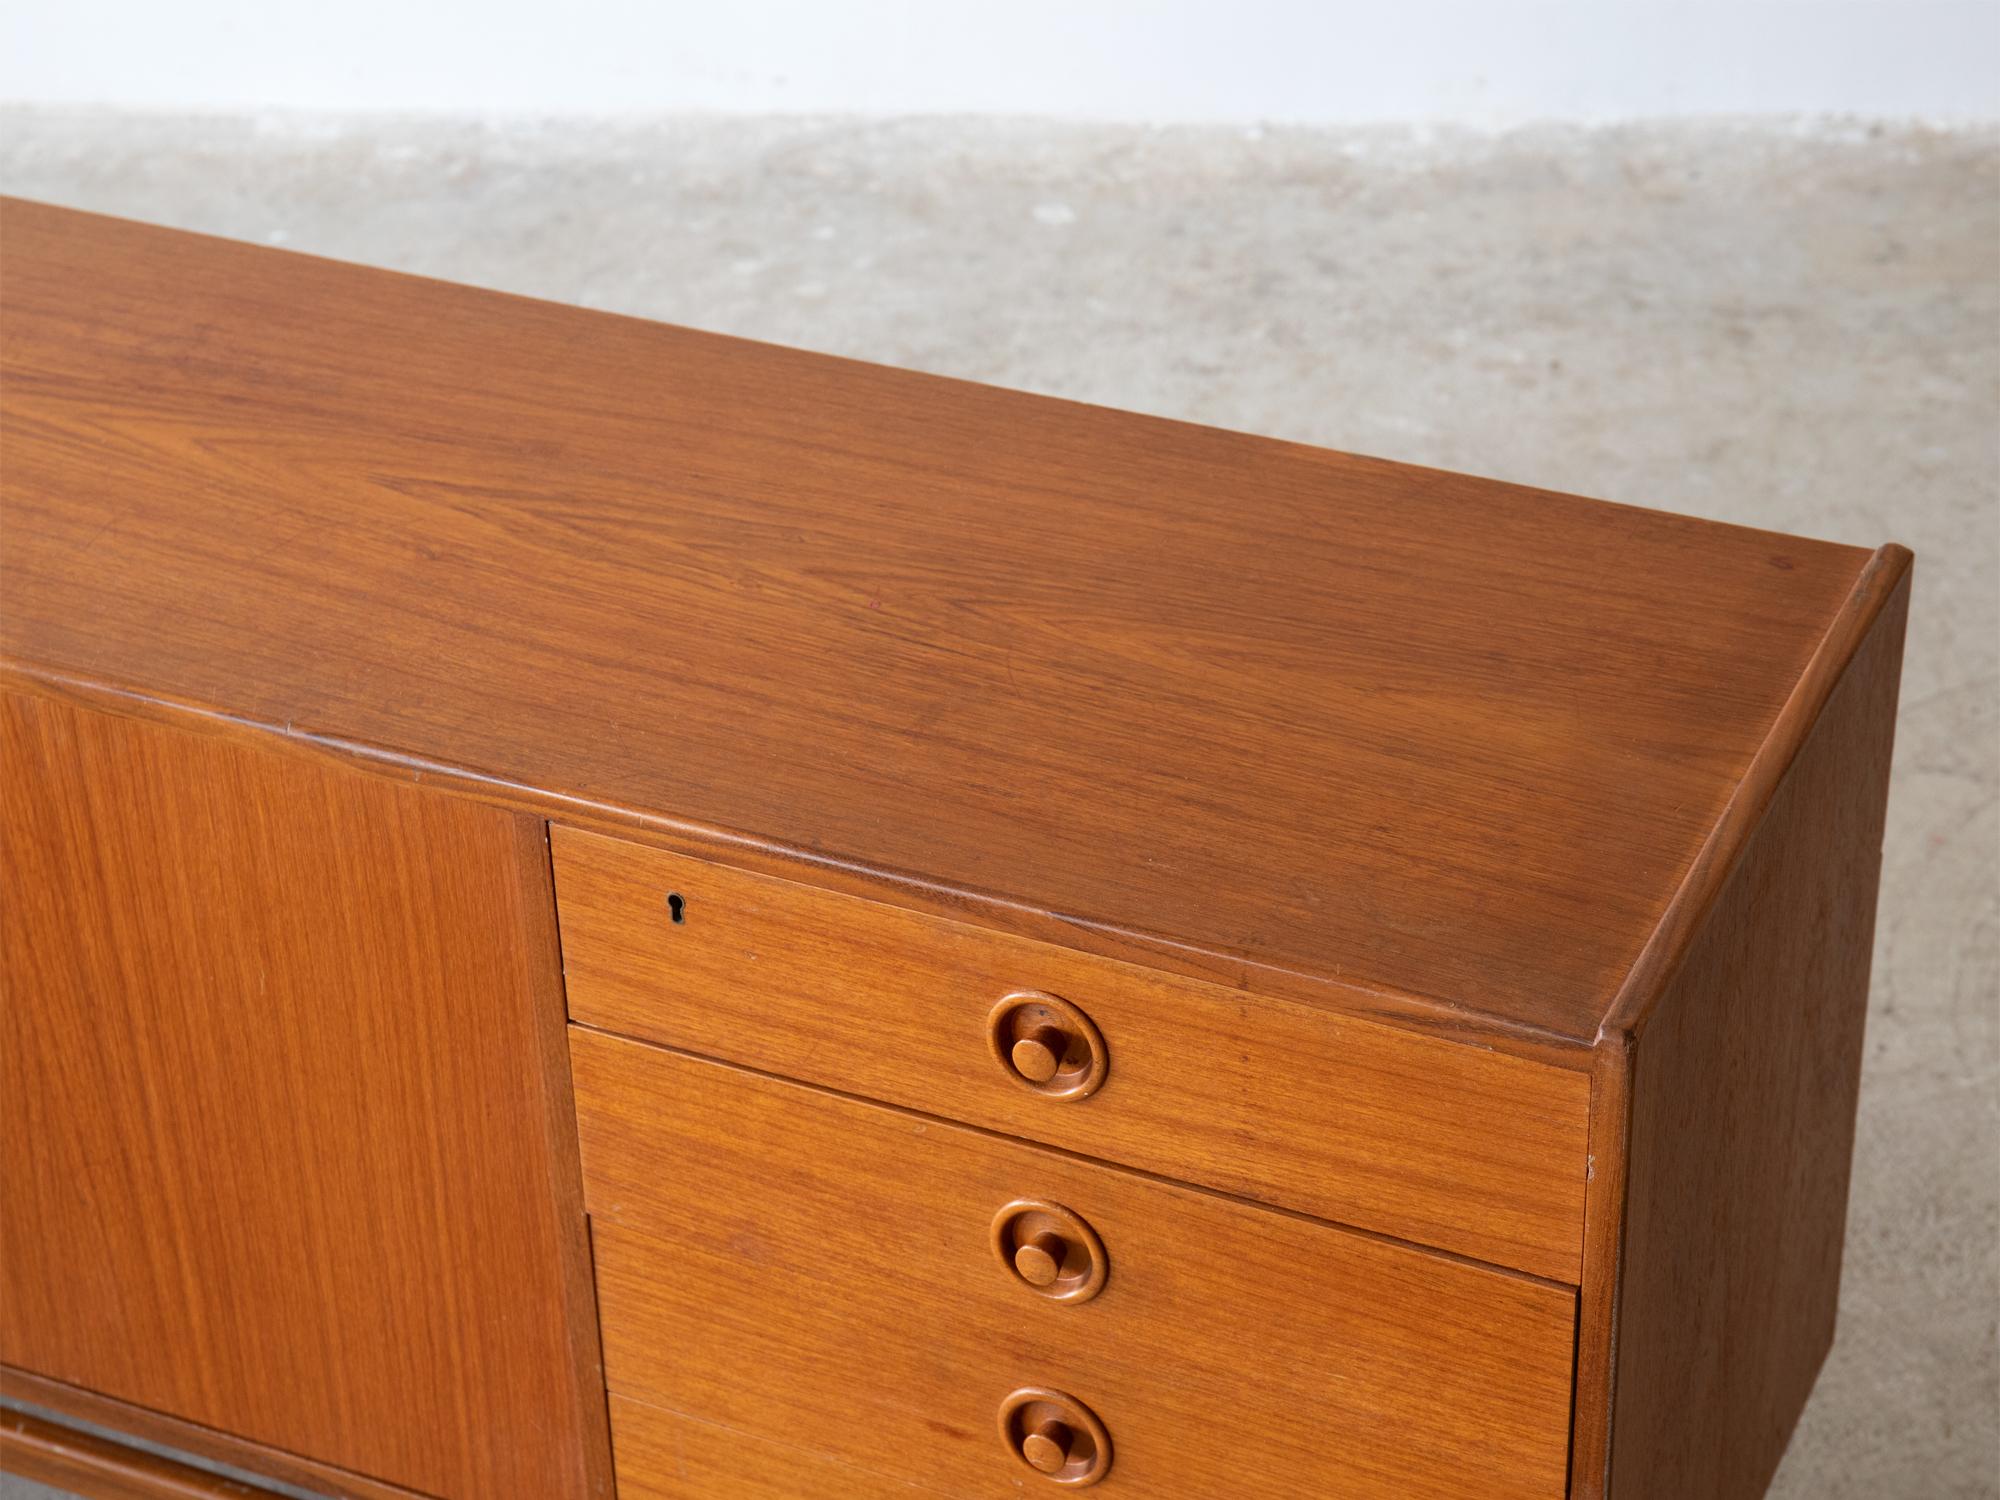 1960s Swedish Teak Sideboard In Good Condition For Sale In Wembley, GB